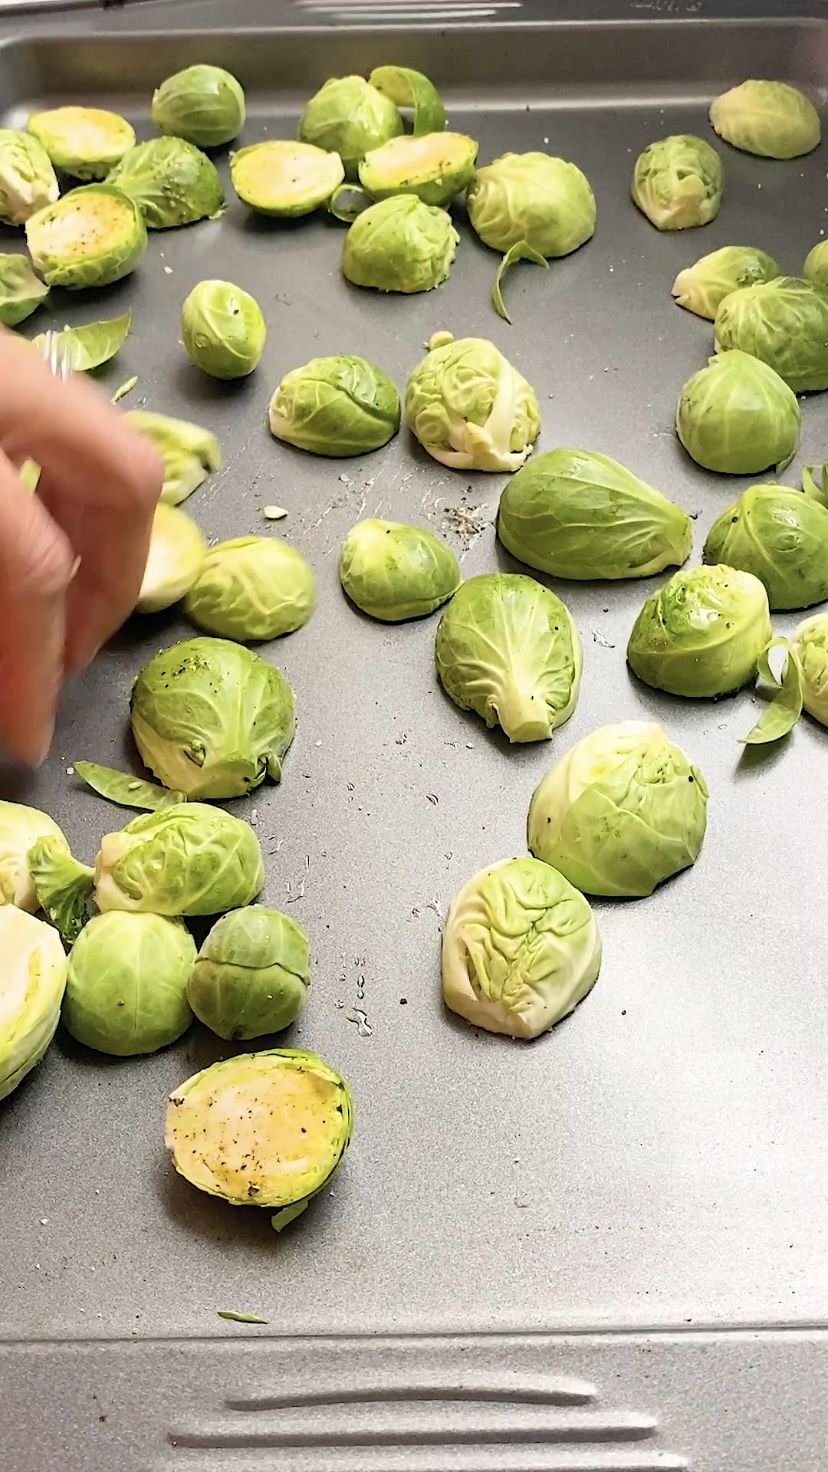 Placing halved Brussels sprouts on a baking sheet flat side down.